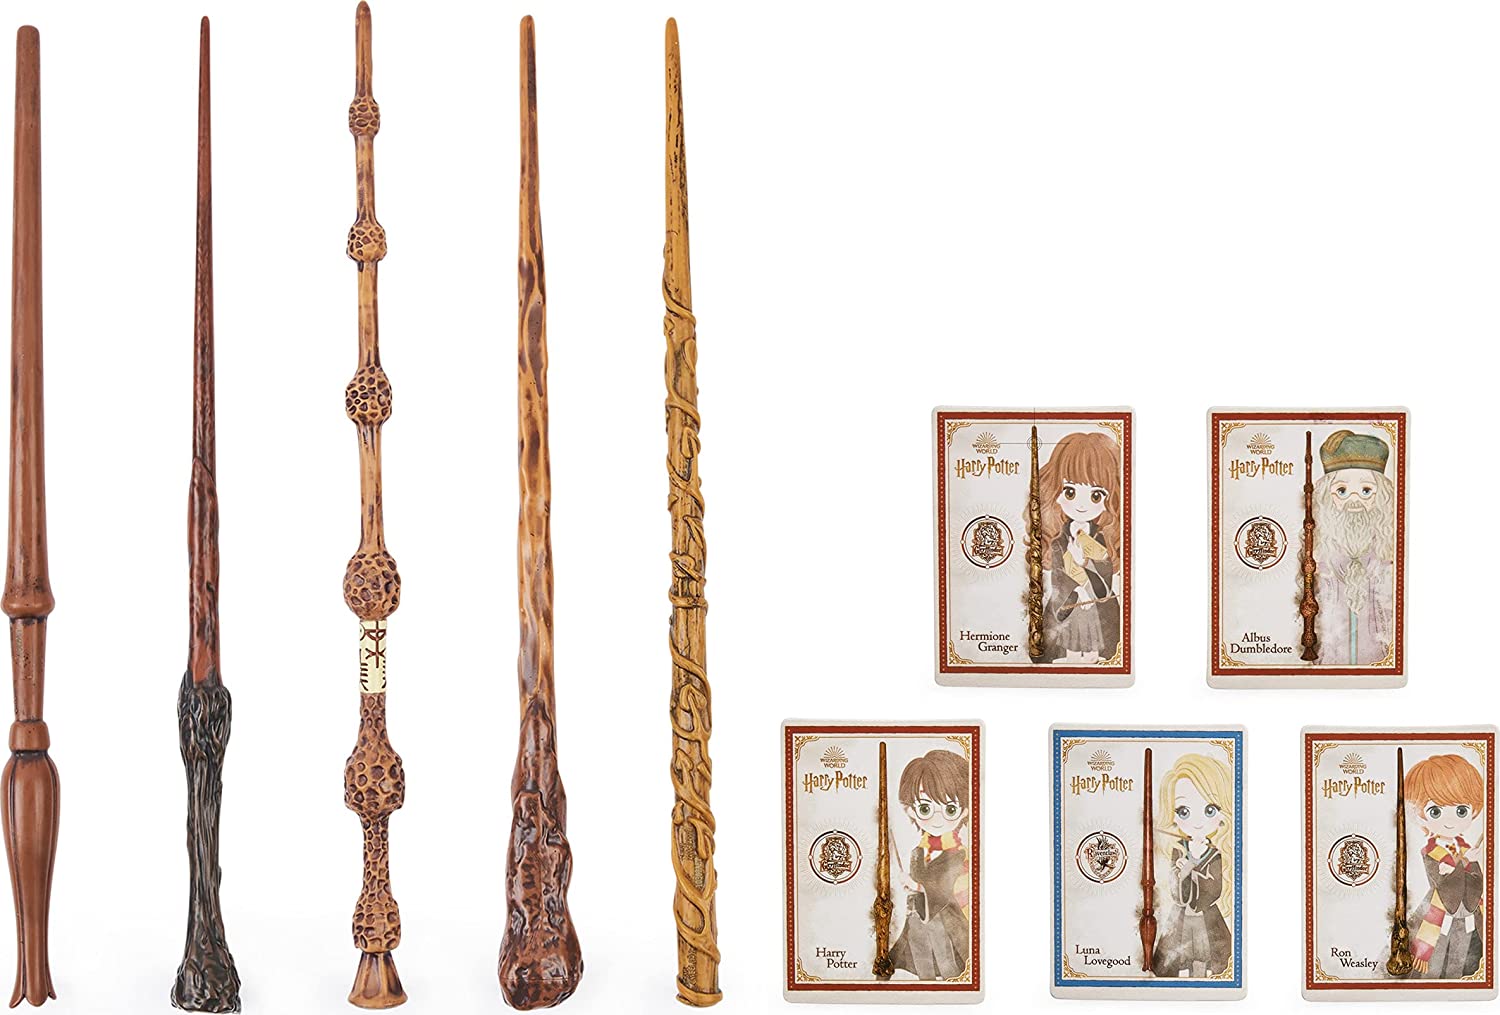 Hermione with Magic Wand and Spellbook · Free Stock Photo